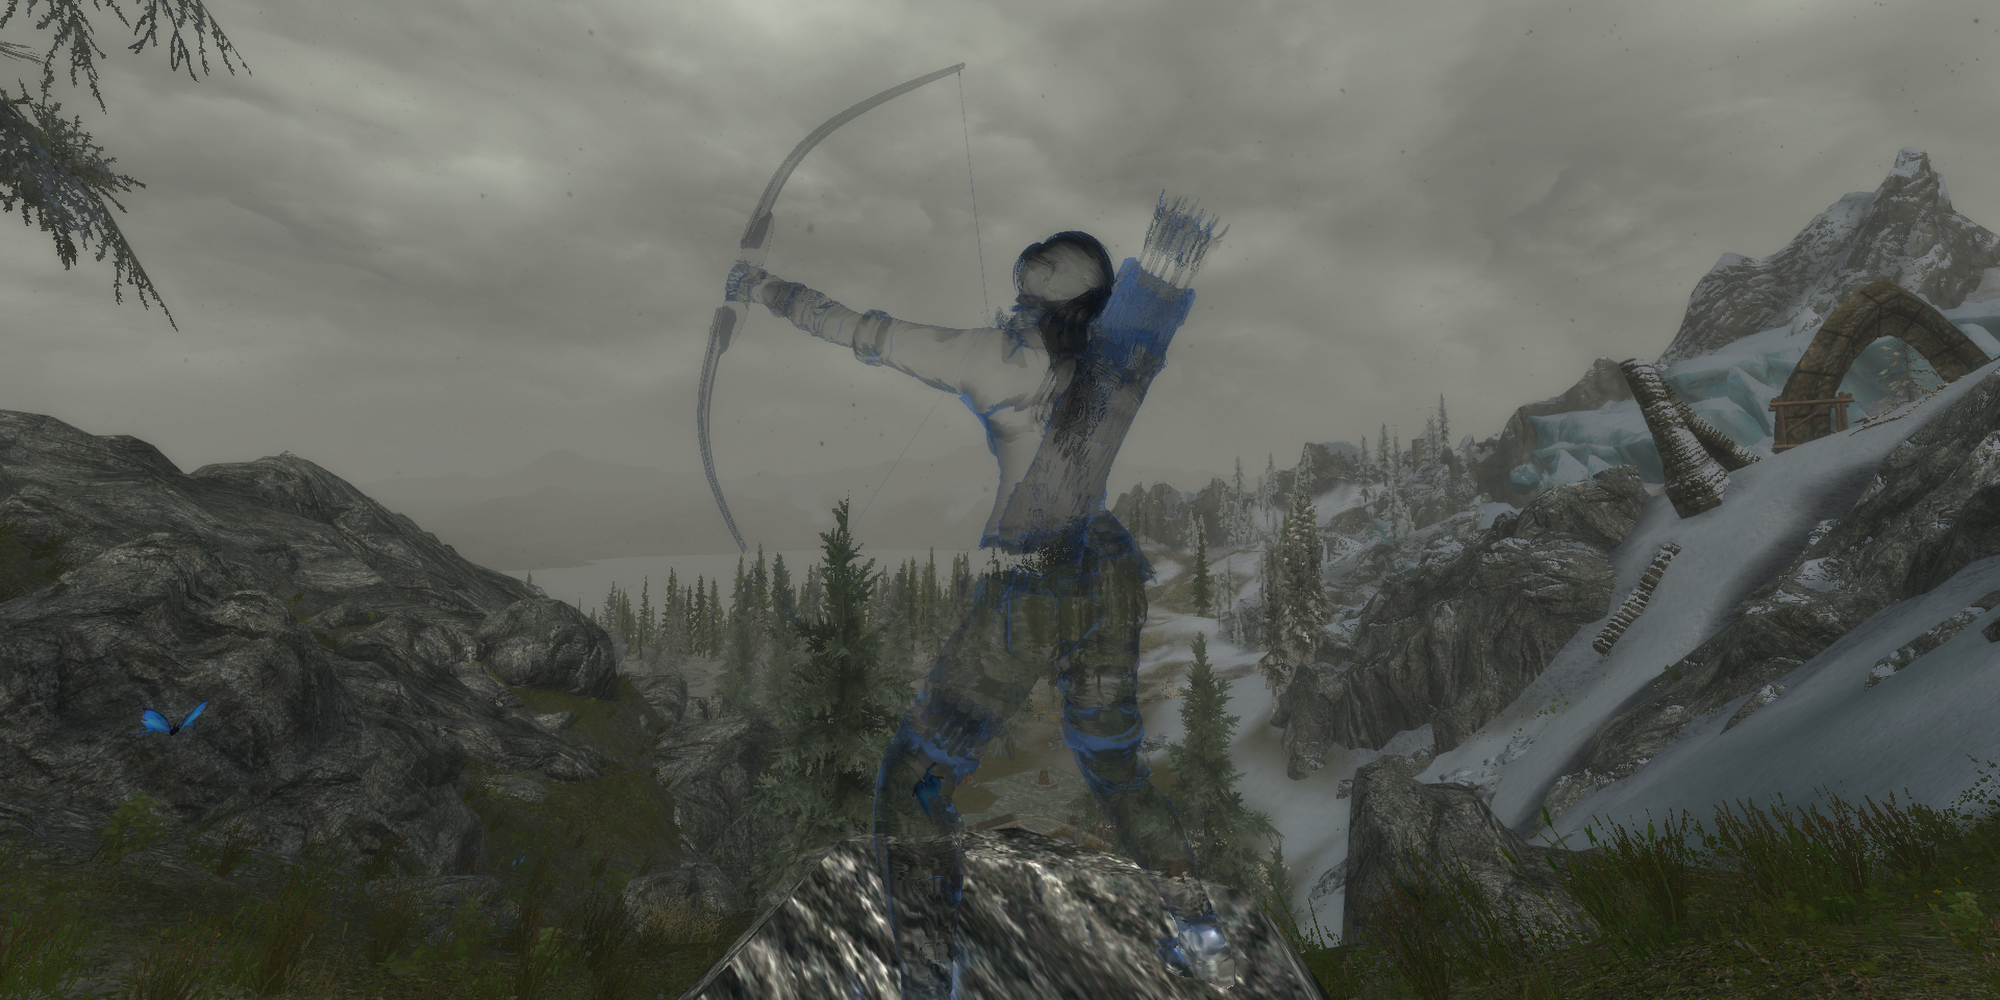 Skyrim character shooting a bow while invisible